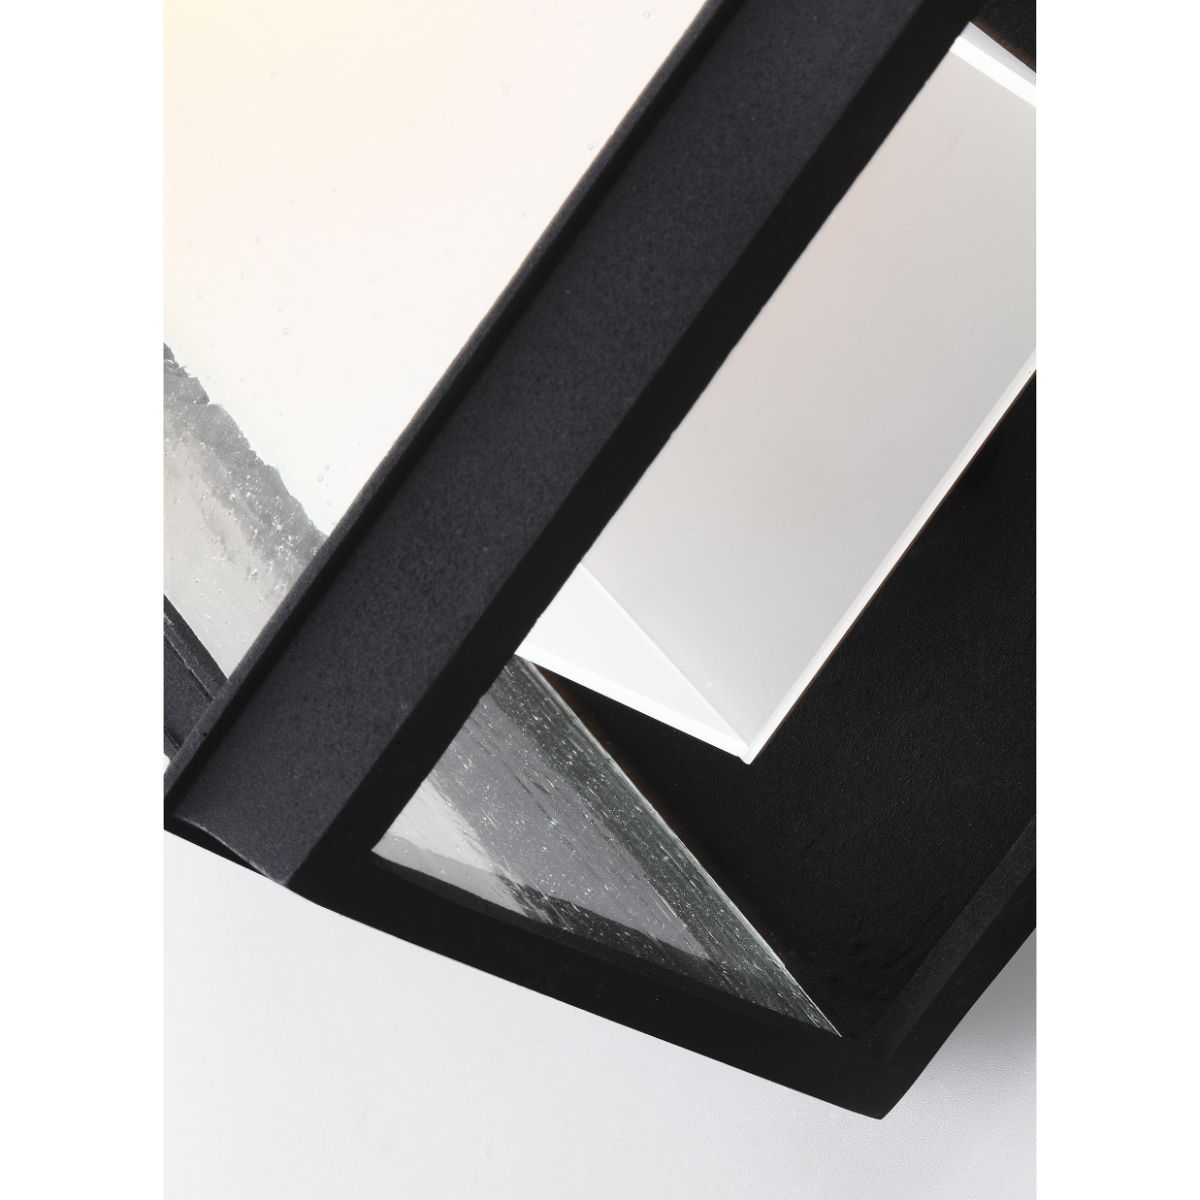 McHenry 13 In. LED Outdoor Wall Sconce Black Finish